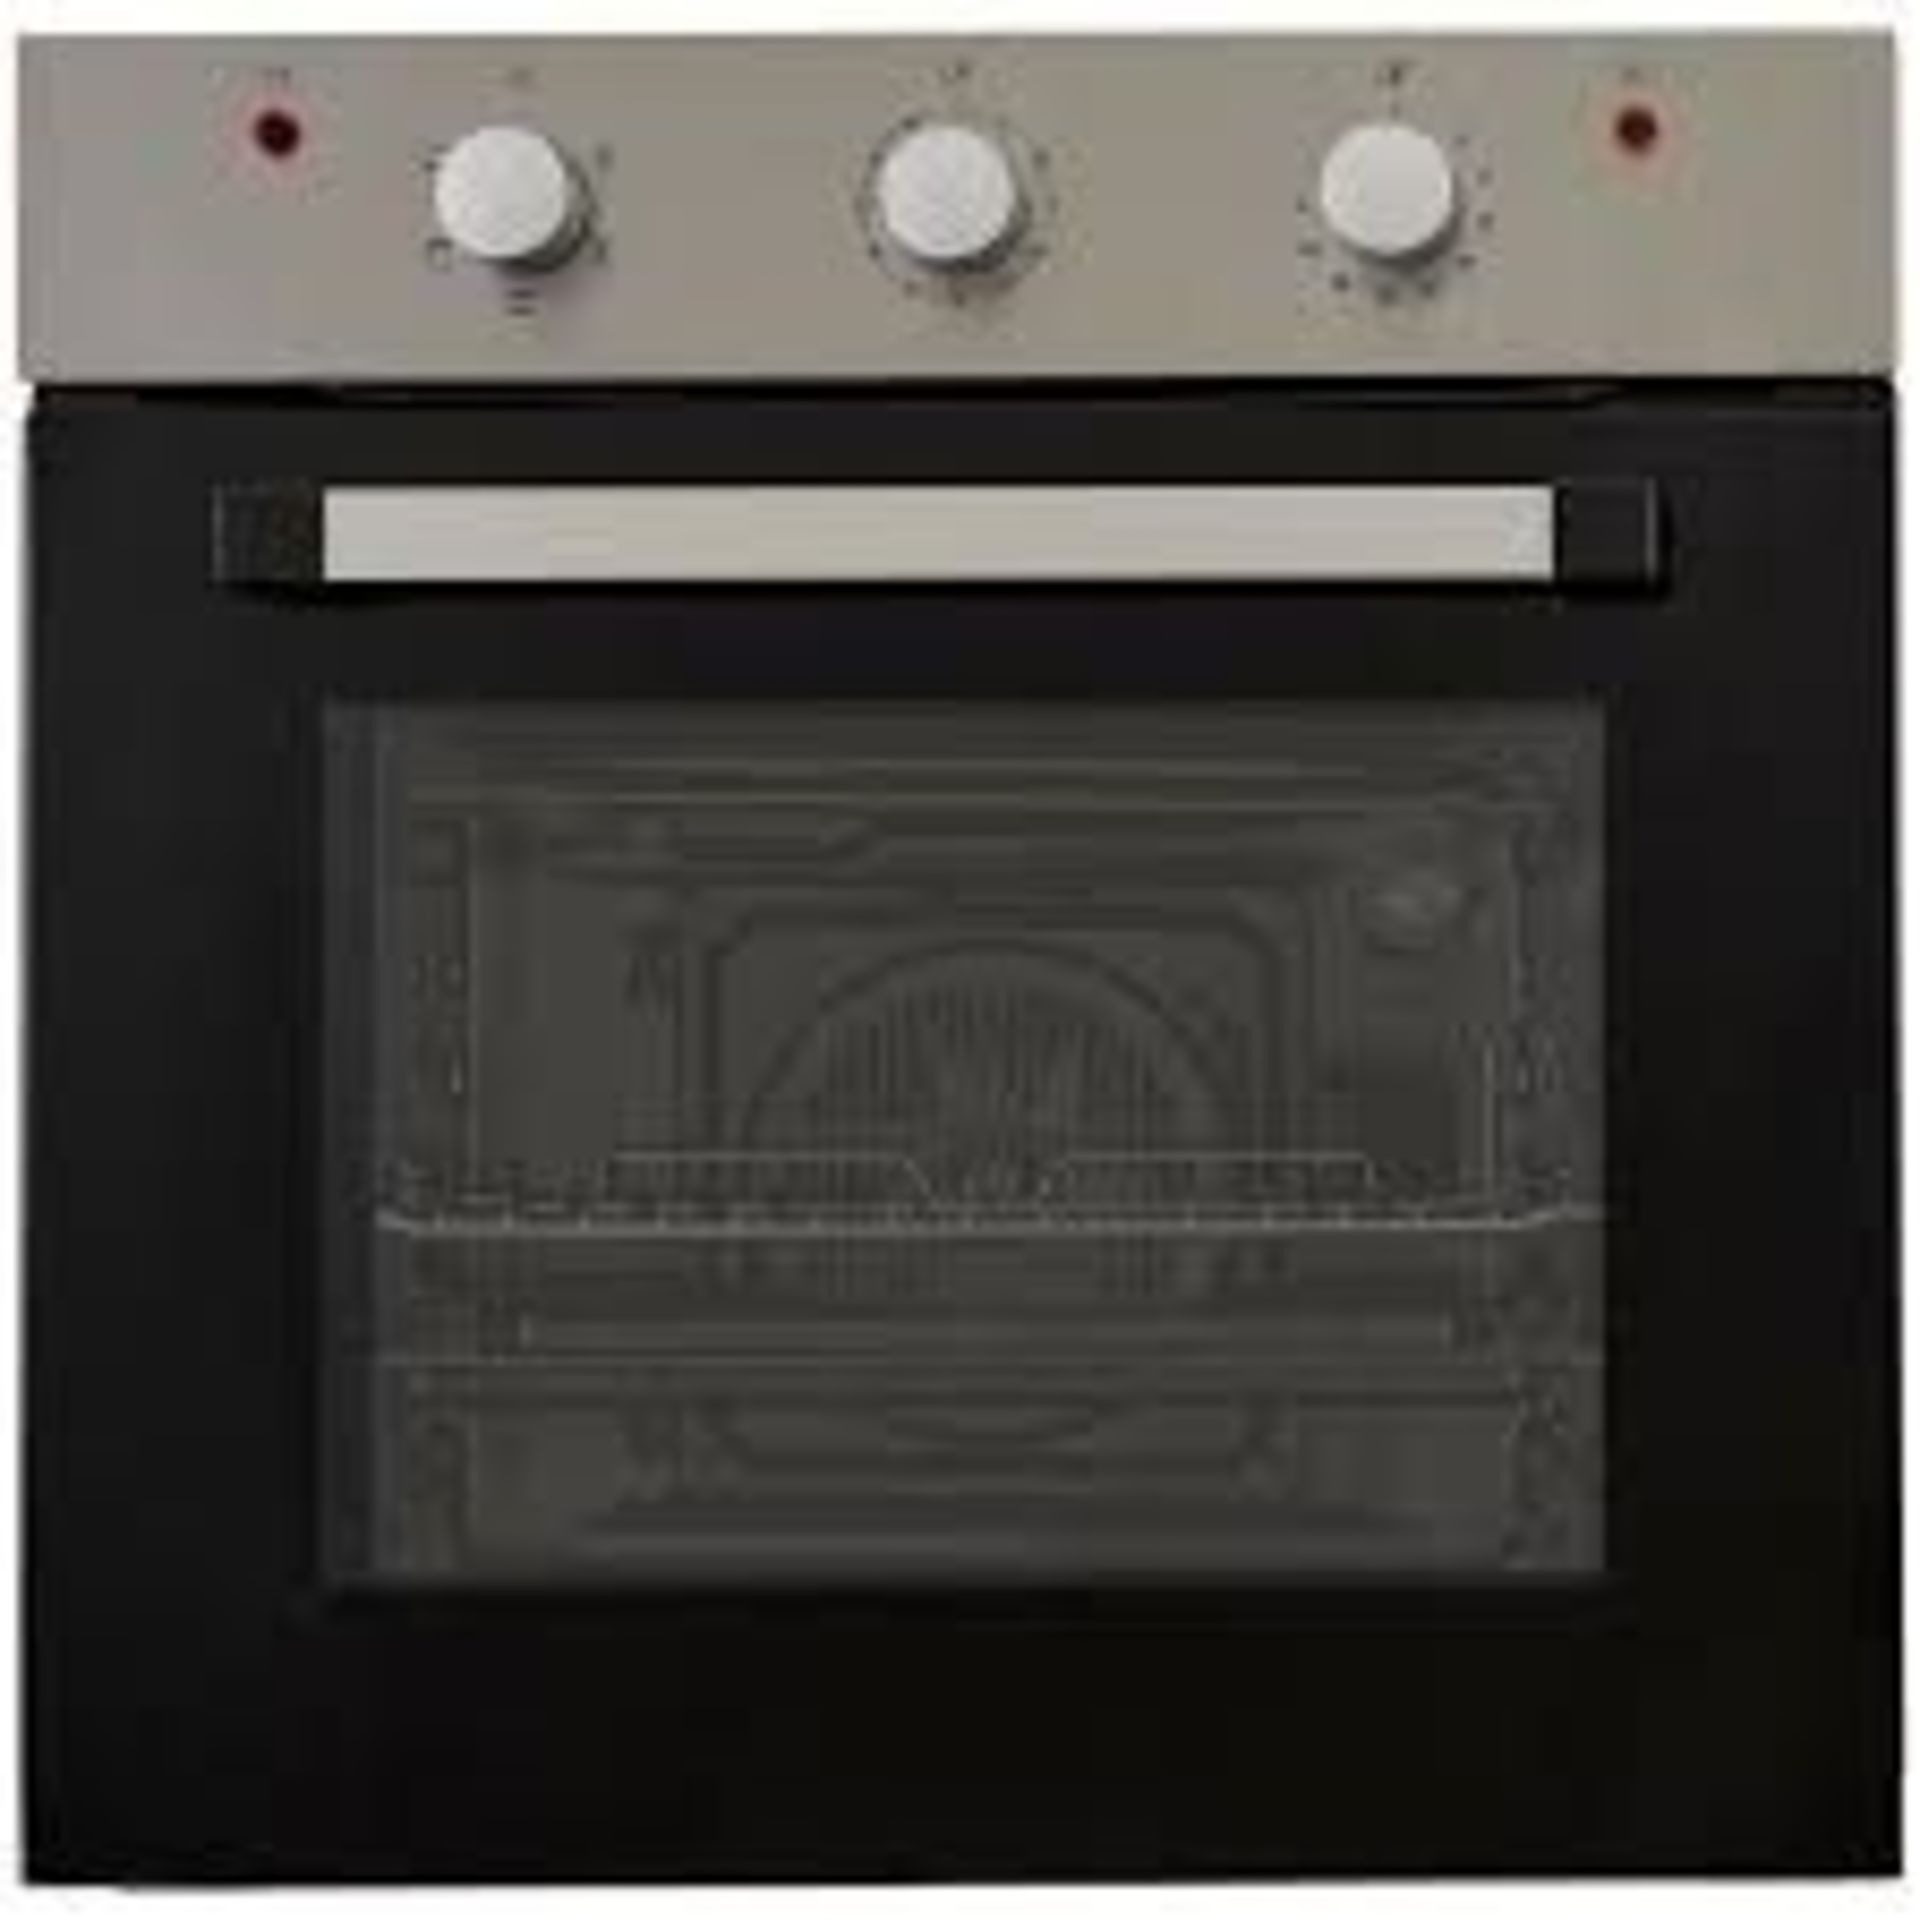 Cooke & Lewis CLFSB60 Built-in Single Fan Oven - Black. - S2. RRP £320.00. Enjoy cooking again